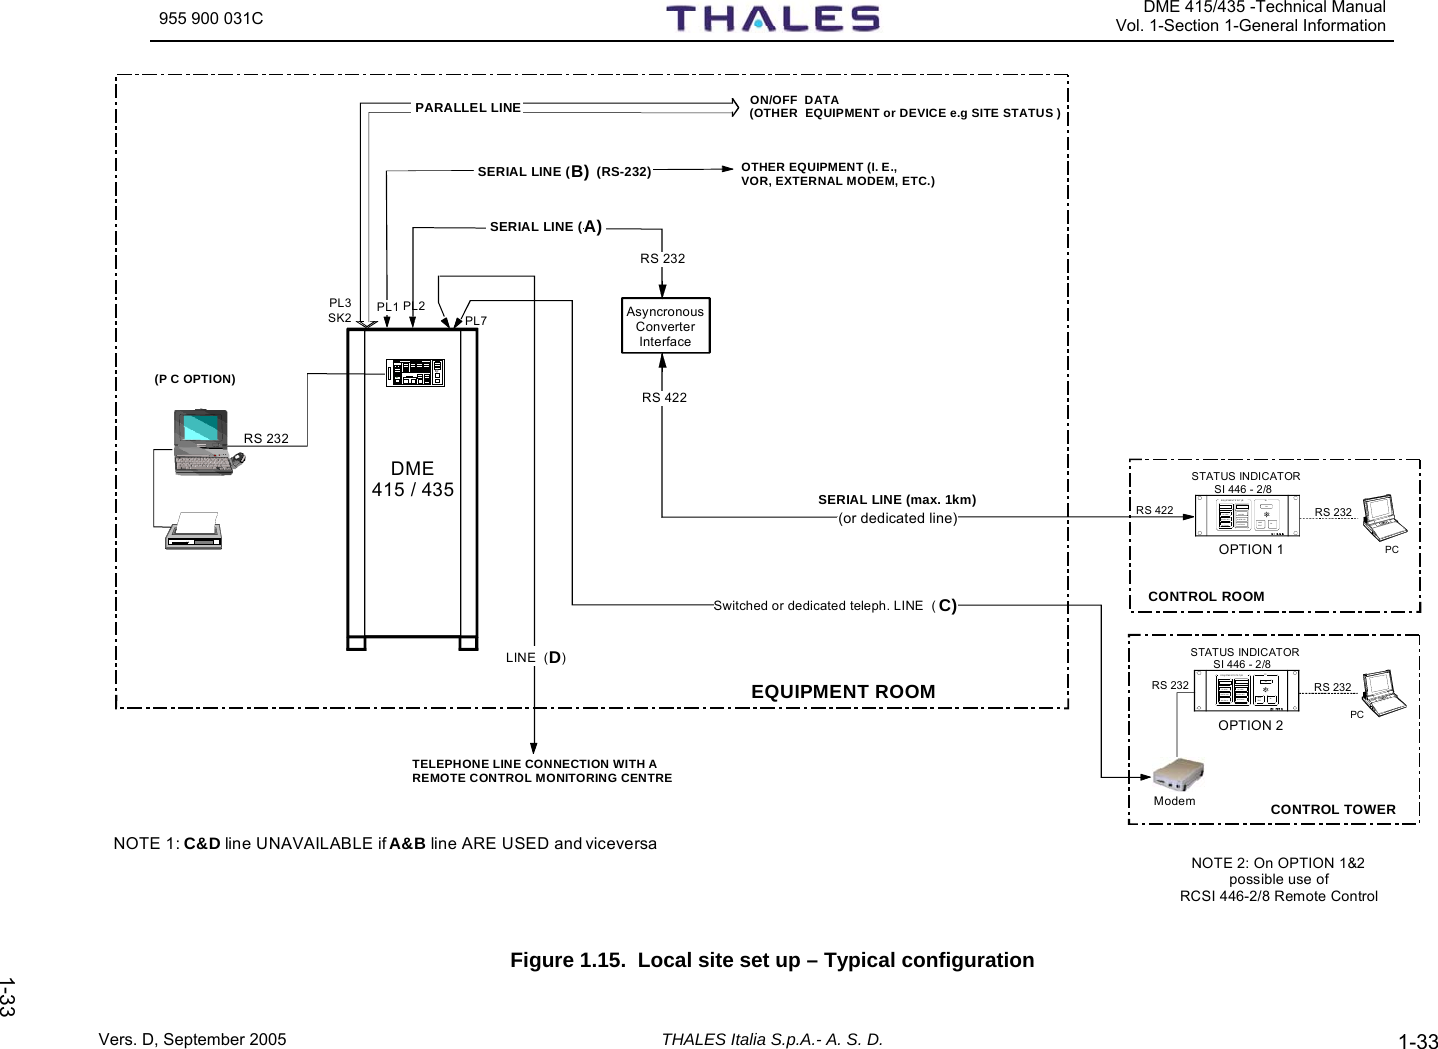 955 900 031C  DME 415/435 -Technical ManualVol. 1-Section 1-General Information Vers. D, September 2005 THALES Italia S.p.A.- A. S. D. 1-33  1-33RS 232STATUS INDICATOR SI 446 - 2/8WARNINGNORM ALALARM1ONSILLAMPTES TEQUIPMENT STATUS SIWARNINGNO R M ALALARM2CONTROL ROOMRS 232PCRS 422STATUS INDICATOR SI 446 - 2/8WARNINGNORM ALALARM1ONSILLAM PTESTEQUIPMENT STATUS SIWARNINGNORM ALALARM2RS 232Modem PCRS 232TELEPHONE LINE CONNECTION WITH A REMOTE CONTROL MONITORING CENTRE SERIAL LINE (B)  (RS-232) OTHER EQUIPMENT (I. E., VOR, EXTERNAL MODEM, ETC.) AsyncronousConverter InterfaceCONTROL TOWEROPTION 1OPTION 2(P C OPTION) PARALLEL LINE ON/OFF  DATA  (OTHER  EQUIPMENT or DEVICE e.g SITE STATUS )EQUIPMENT ROOMPL7PL2PL3SK2NOTE 1: C&amp;D line UNAVAILABLE if A&amp;B line ARE USED and viceversa NOTE 2: On OPTION 1&amp;2possible use of RCSI 446-2/8 Remote ControlPL1DME 415 / 435  Switched or dedicated teleph. LINE  ( C)RS 422 SERIAL LINE (A) RS 232LINE  (D) SERIAL LINE (max. 1km)  (or dedicated line) Figure 1.15.  Local site set up – Typical configuration  